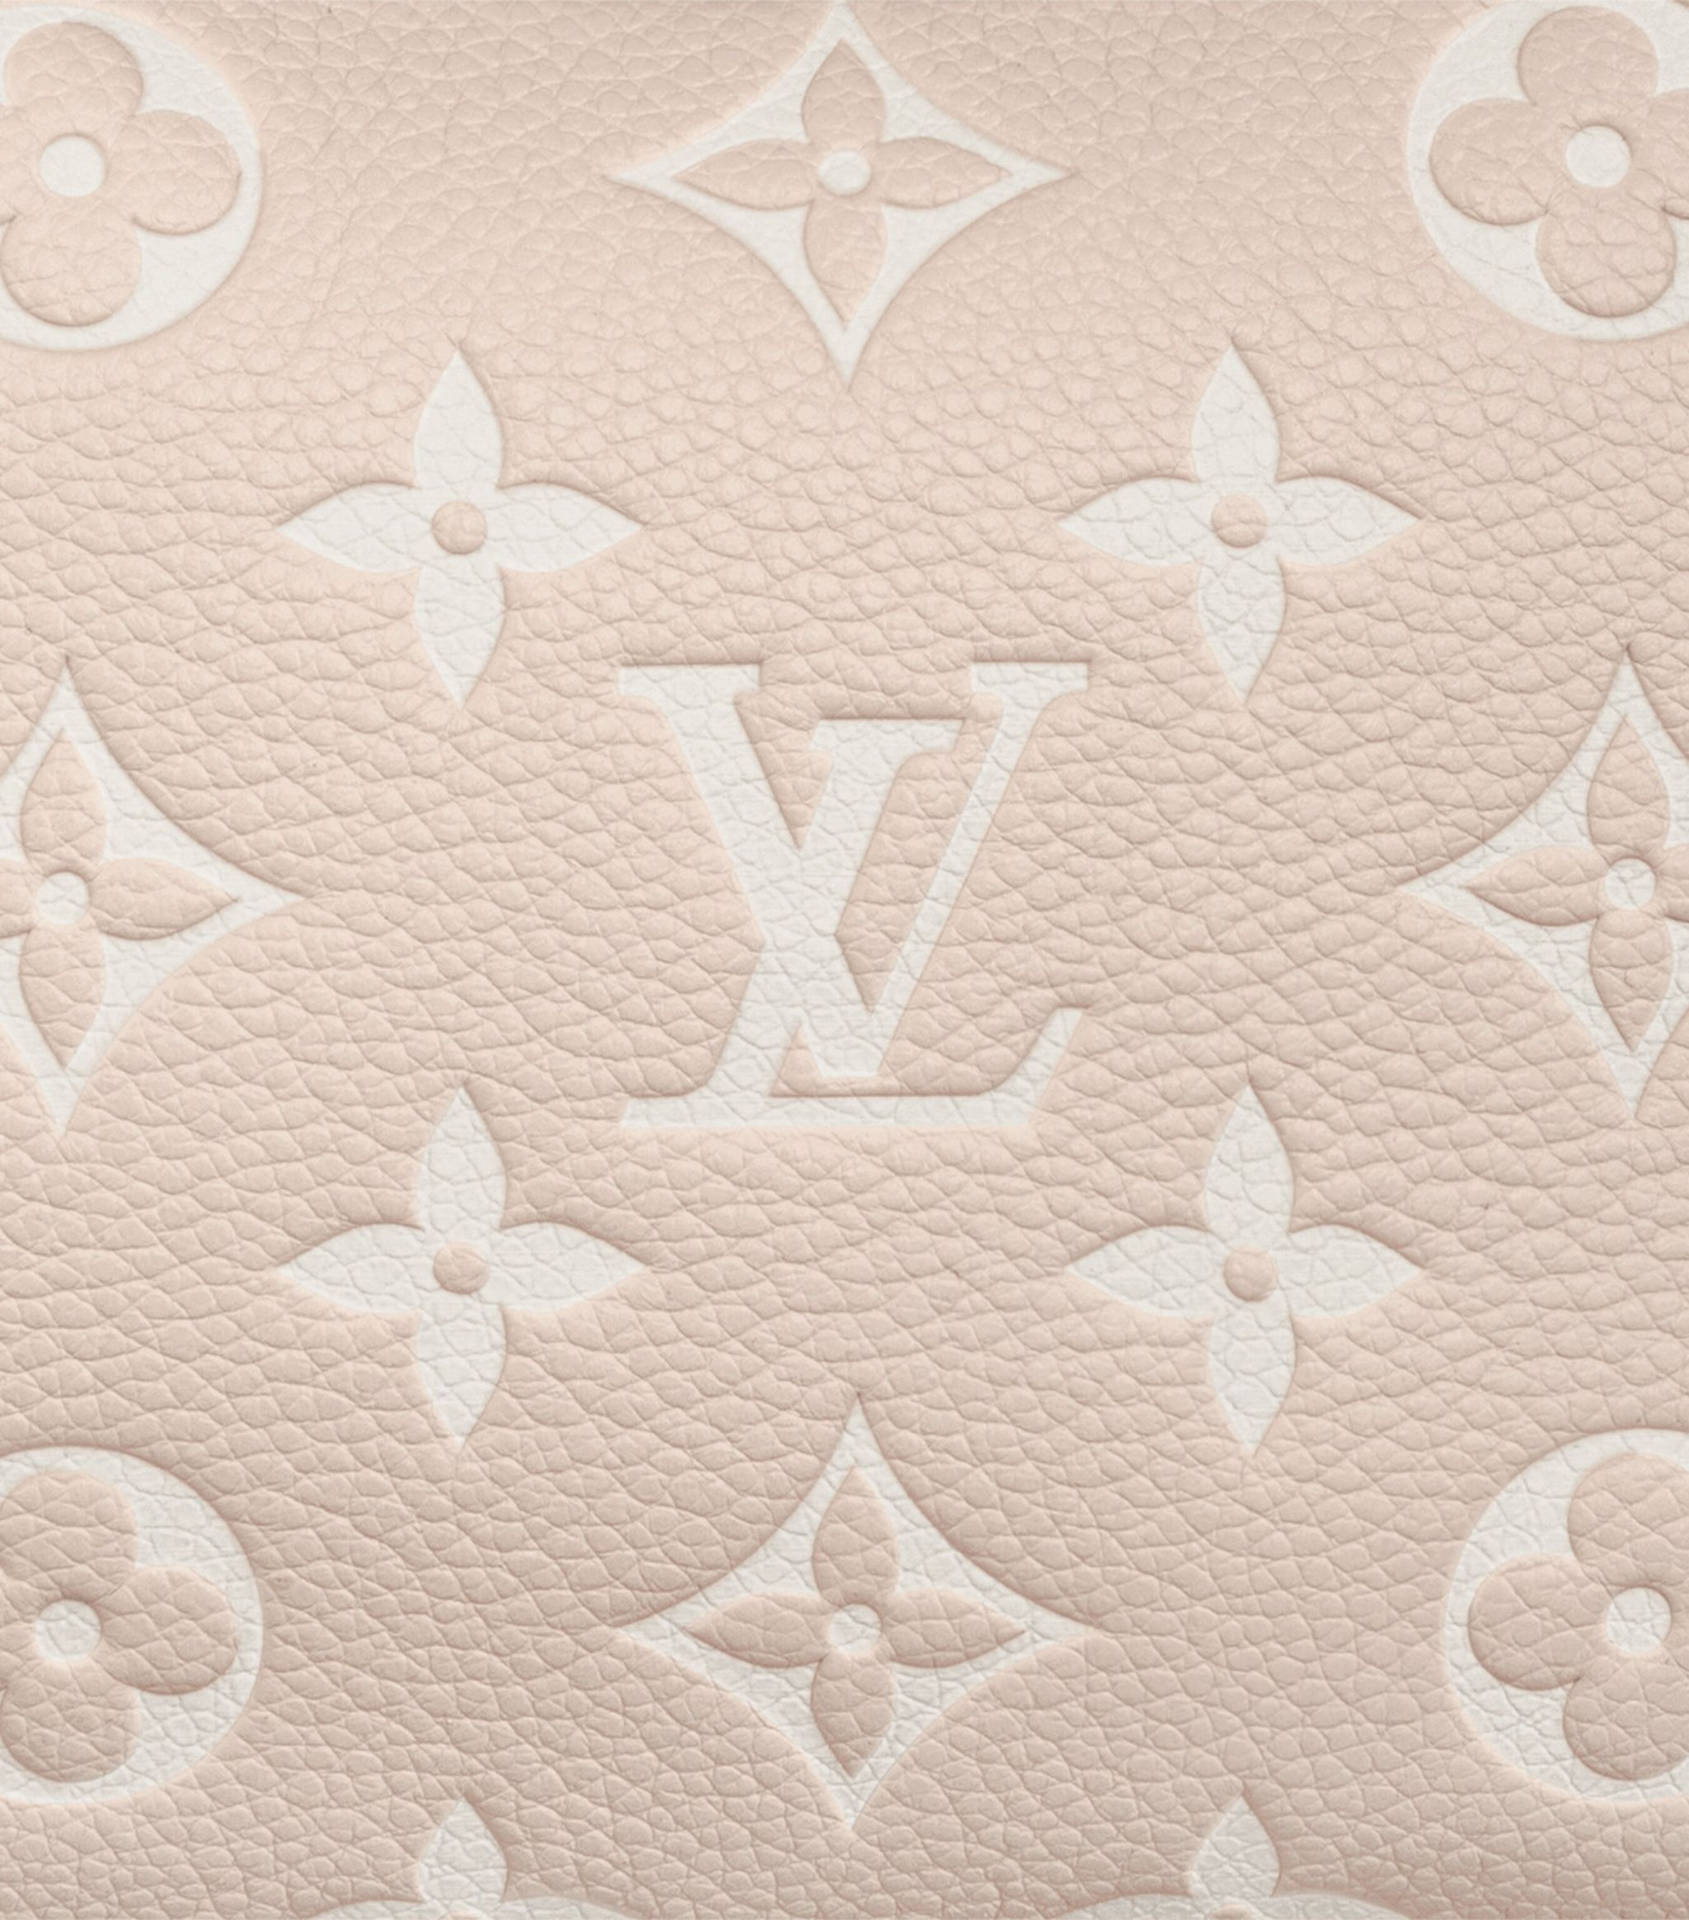 Louis vuitton aesthetic HD wallpapers